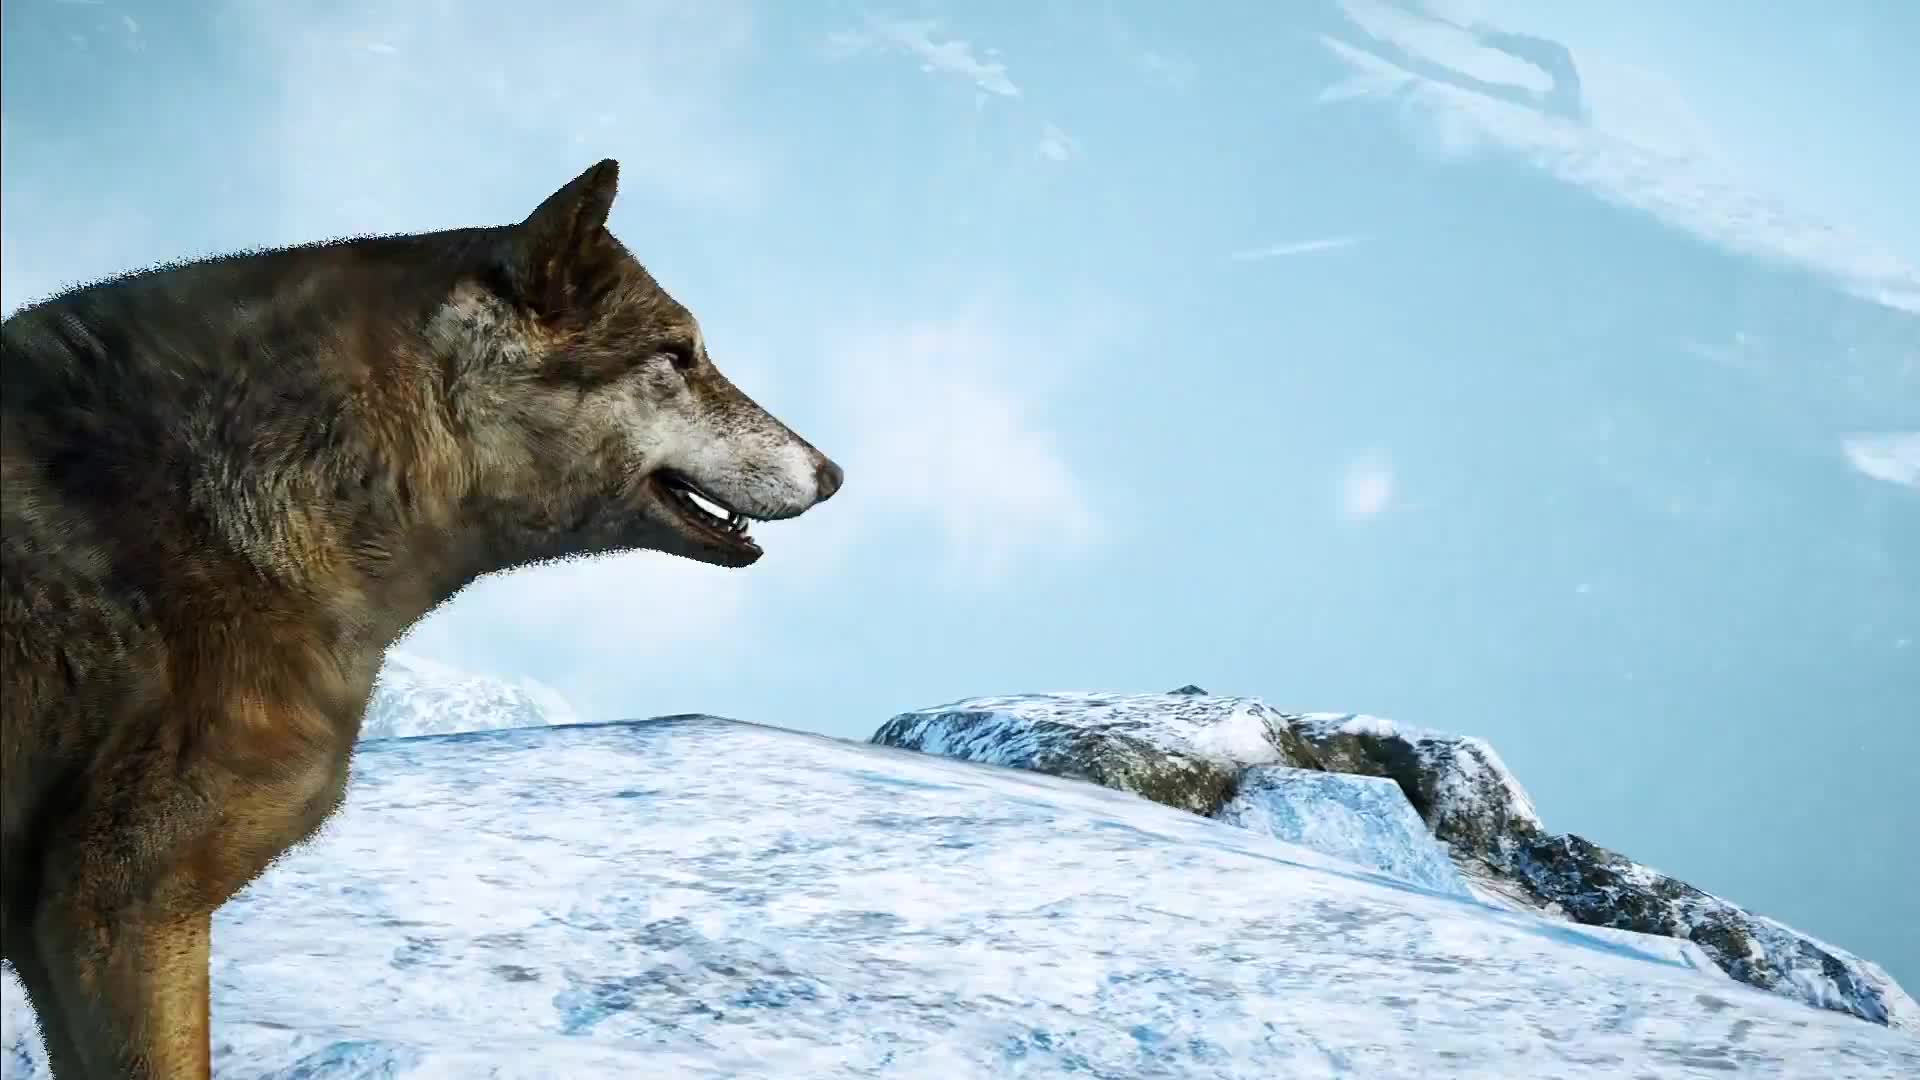 Far Cry 4 - Welcome to Kyrat - Midlands and Himalayas